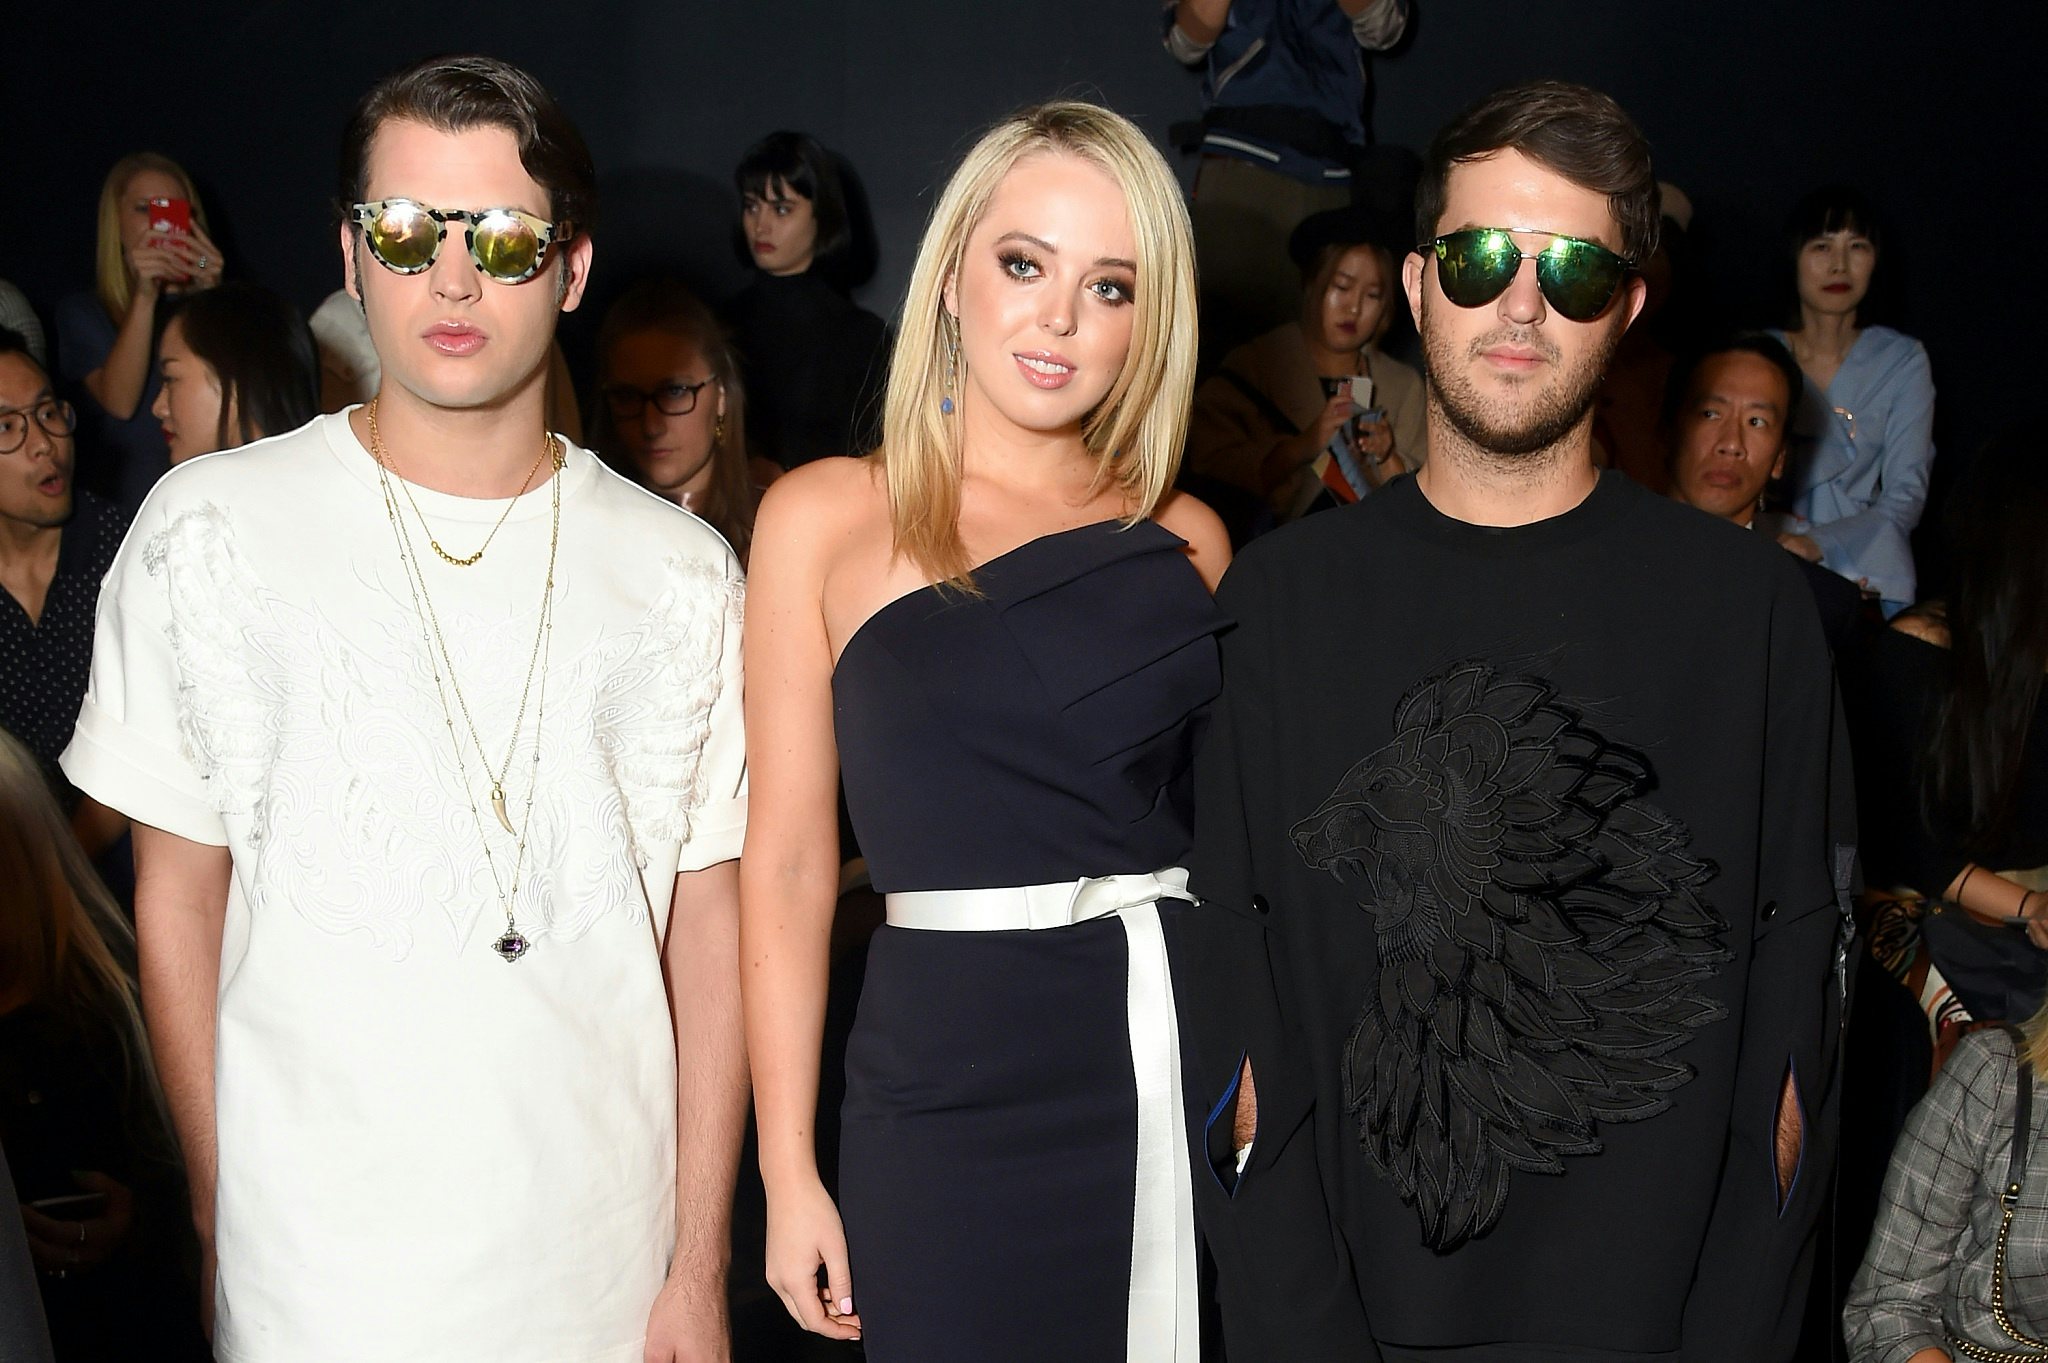 (L-R) Peter Brant, Jr., Tiffany Trump and Andrew Warren attend the Taoray Wang fashion show during New York Fashion Week: The Shows at Gallery 1, Skylight Clarkson Sq on September 9, 2017 in New York City. Photo: Nicholas Hunt/Getty.